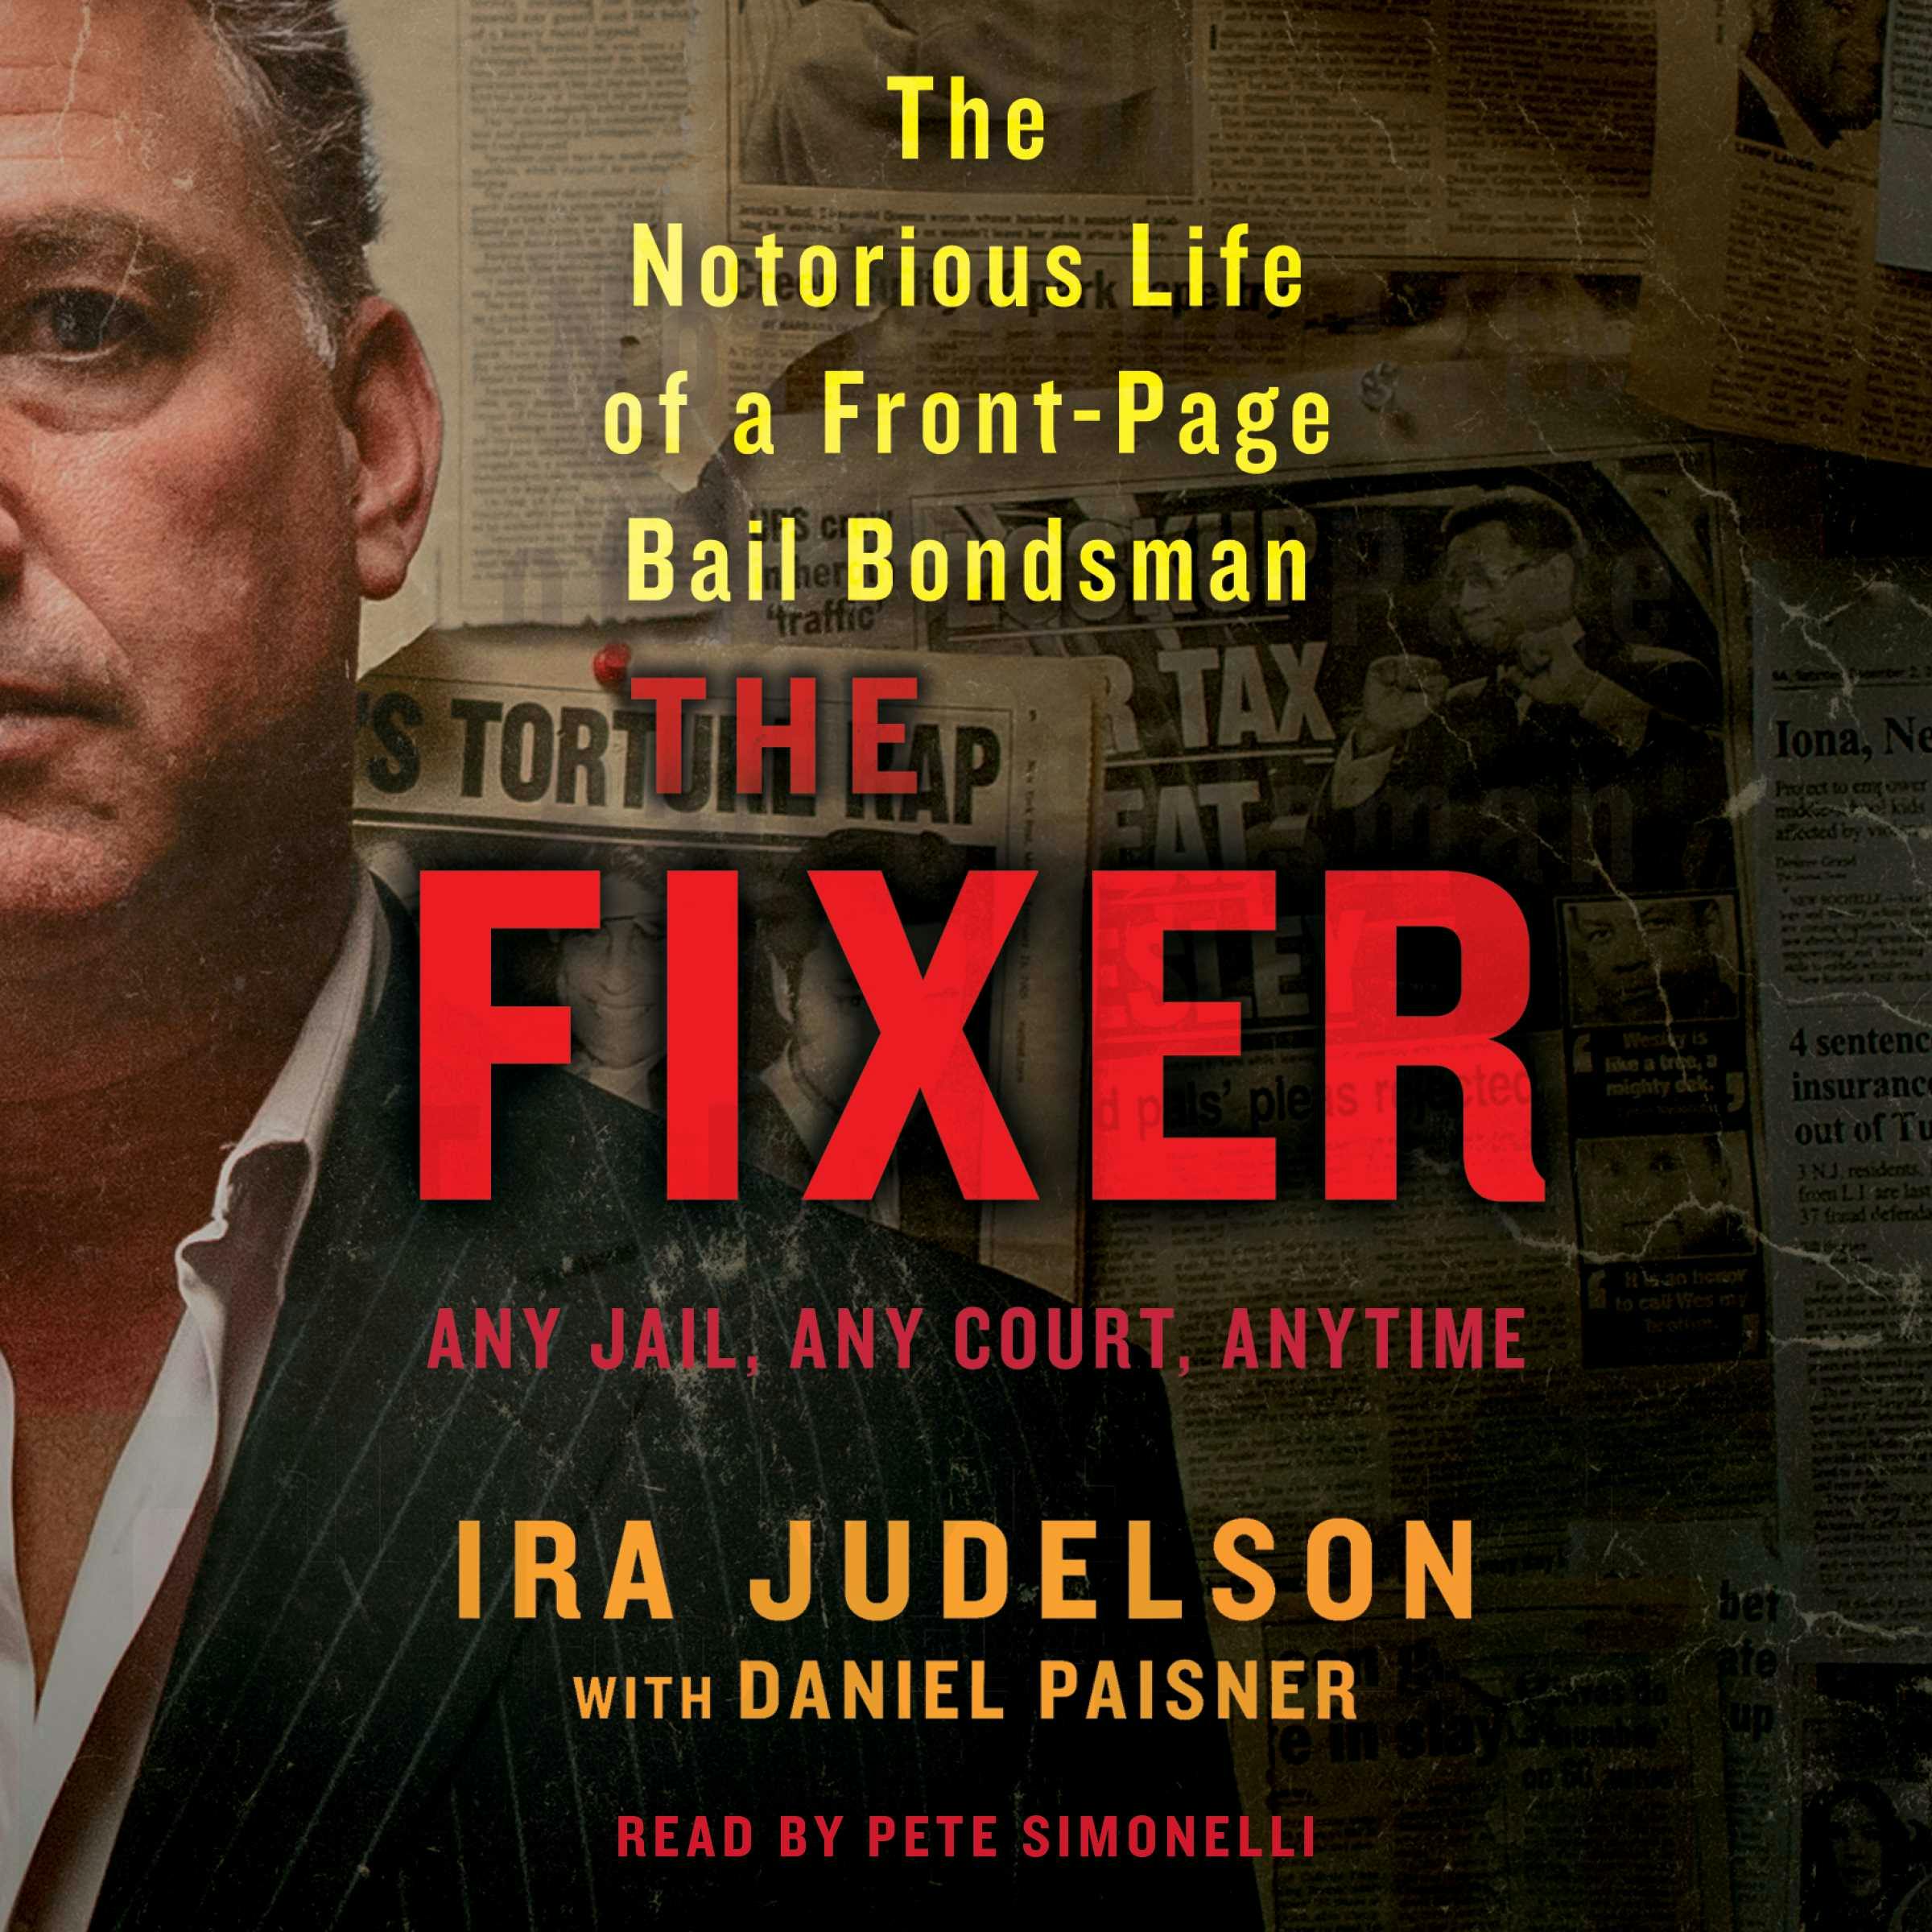 The Fixer: The Notorious Life of a Front-Page Bail Bondsman - Ira Judelson